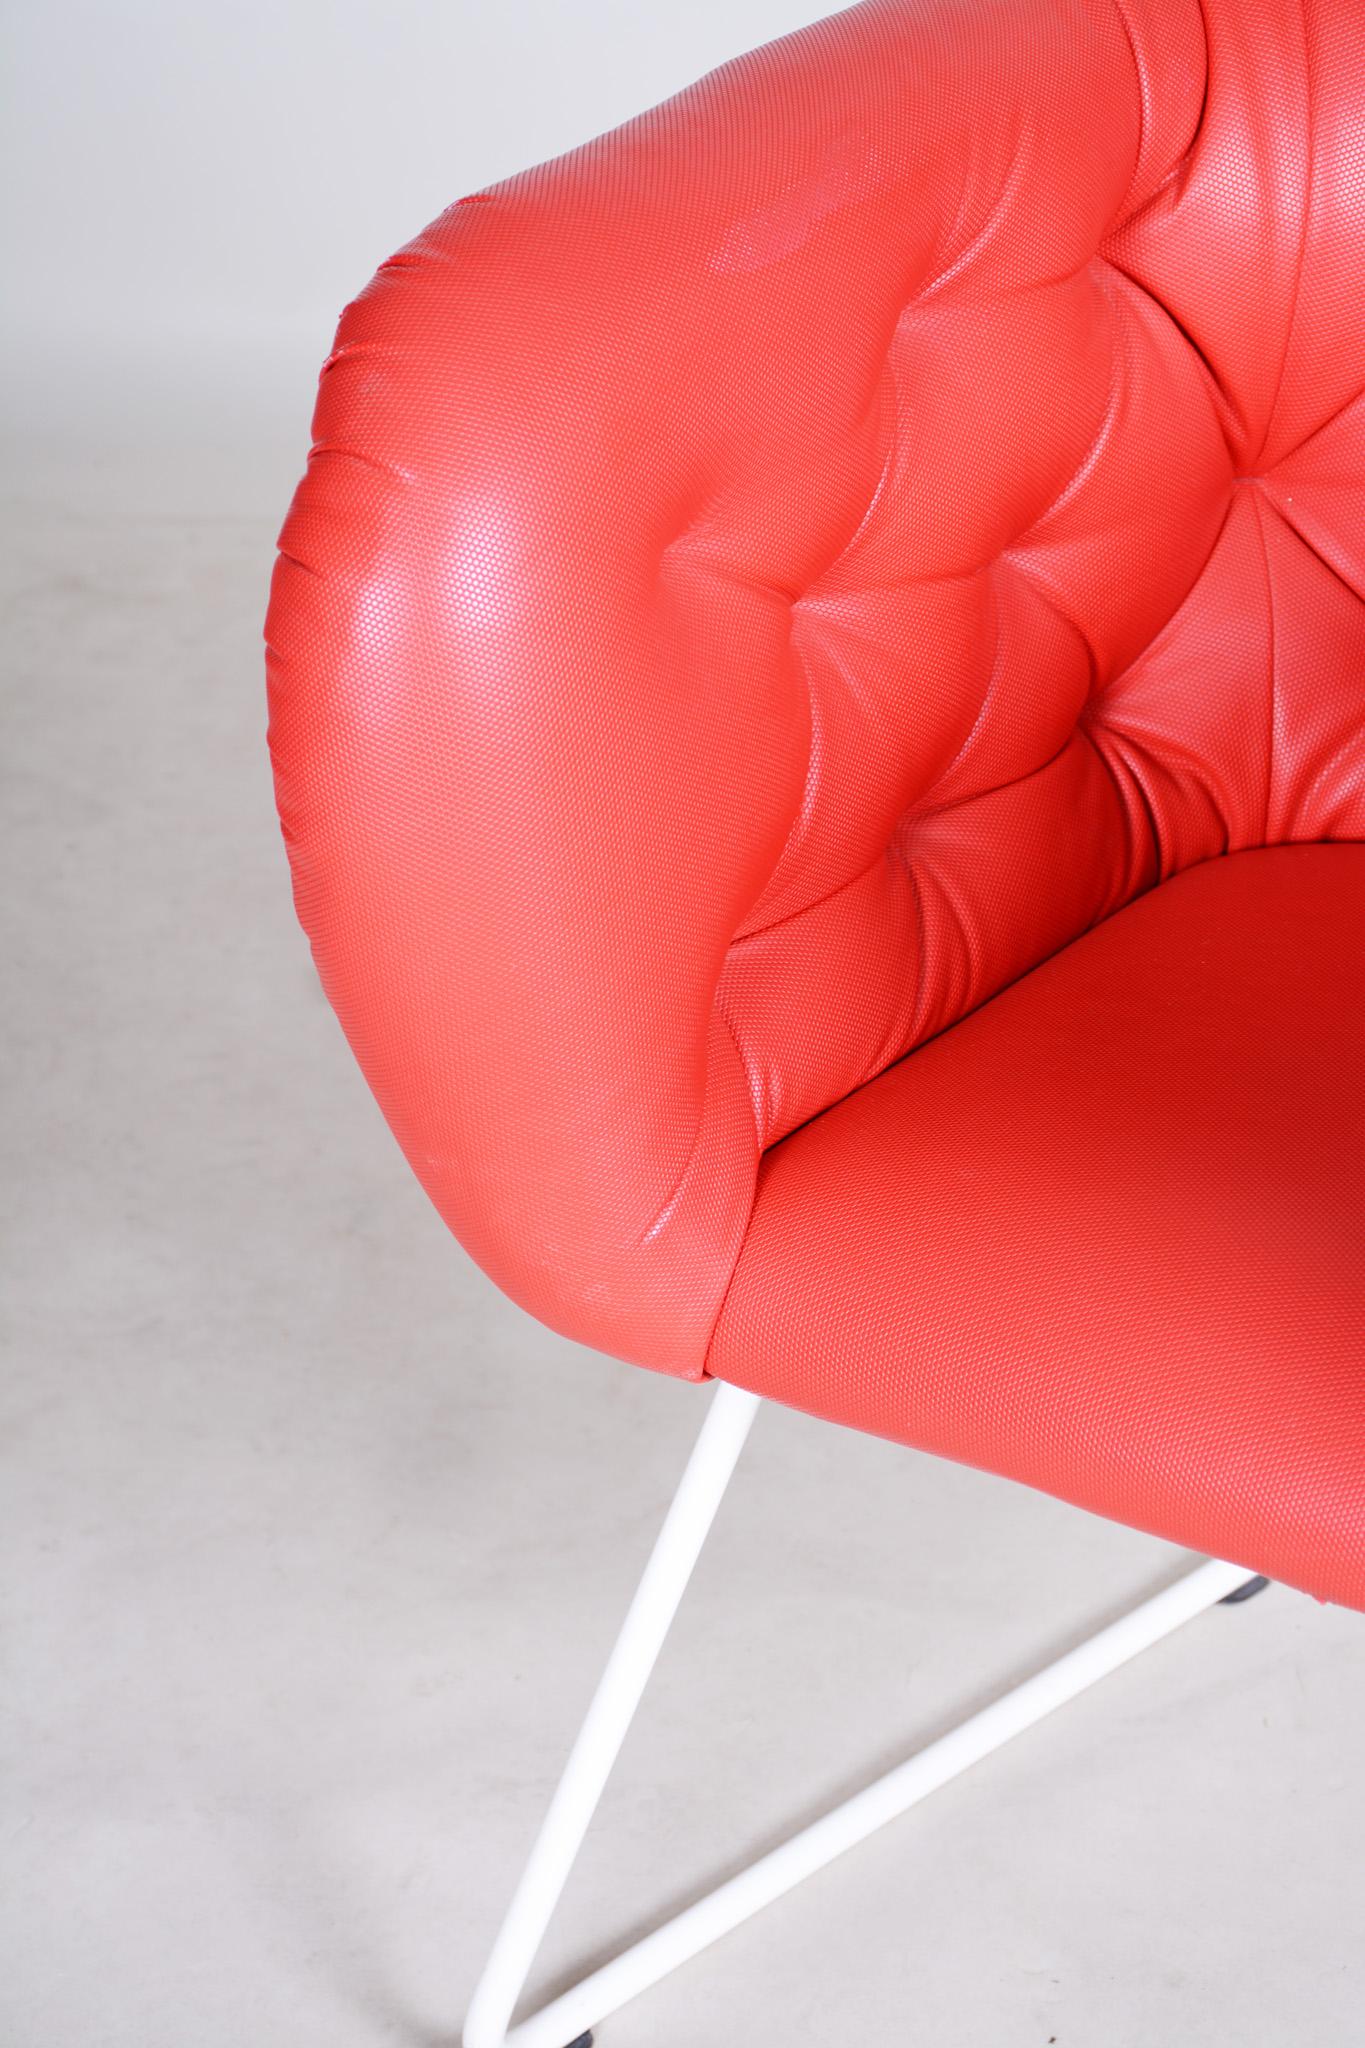 Mid-Century Red and White Armchair, Original Condition, Czechia, 1960s For Sale 6